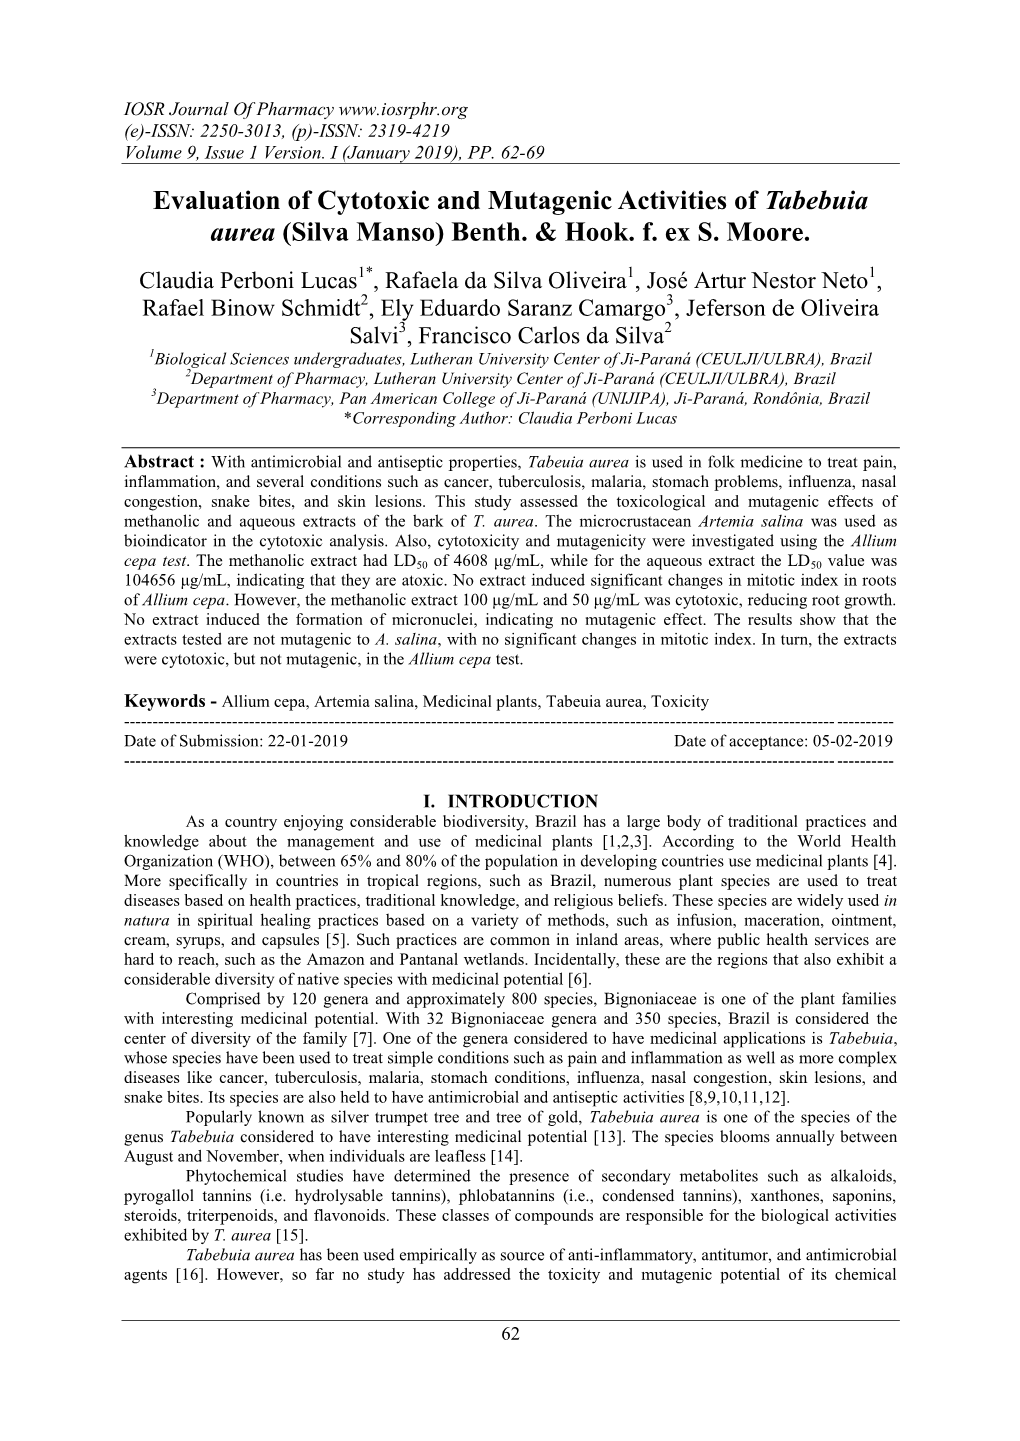 Evaluation of Cytotoxic and Mutagenic Activities of Tabebuia Aurea (Silva Manso) Benth